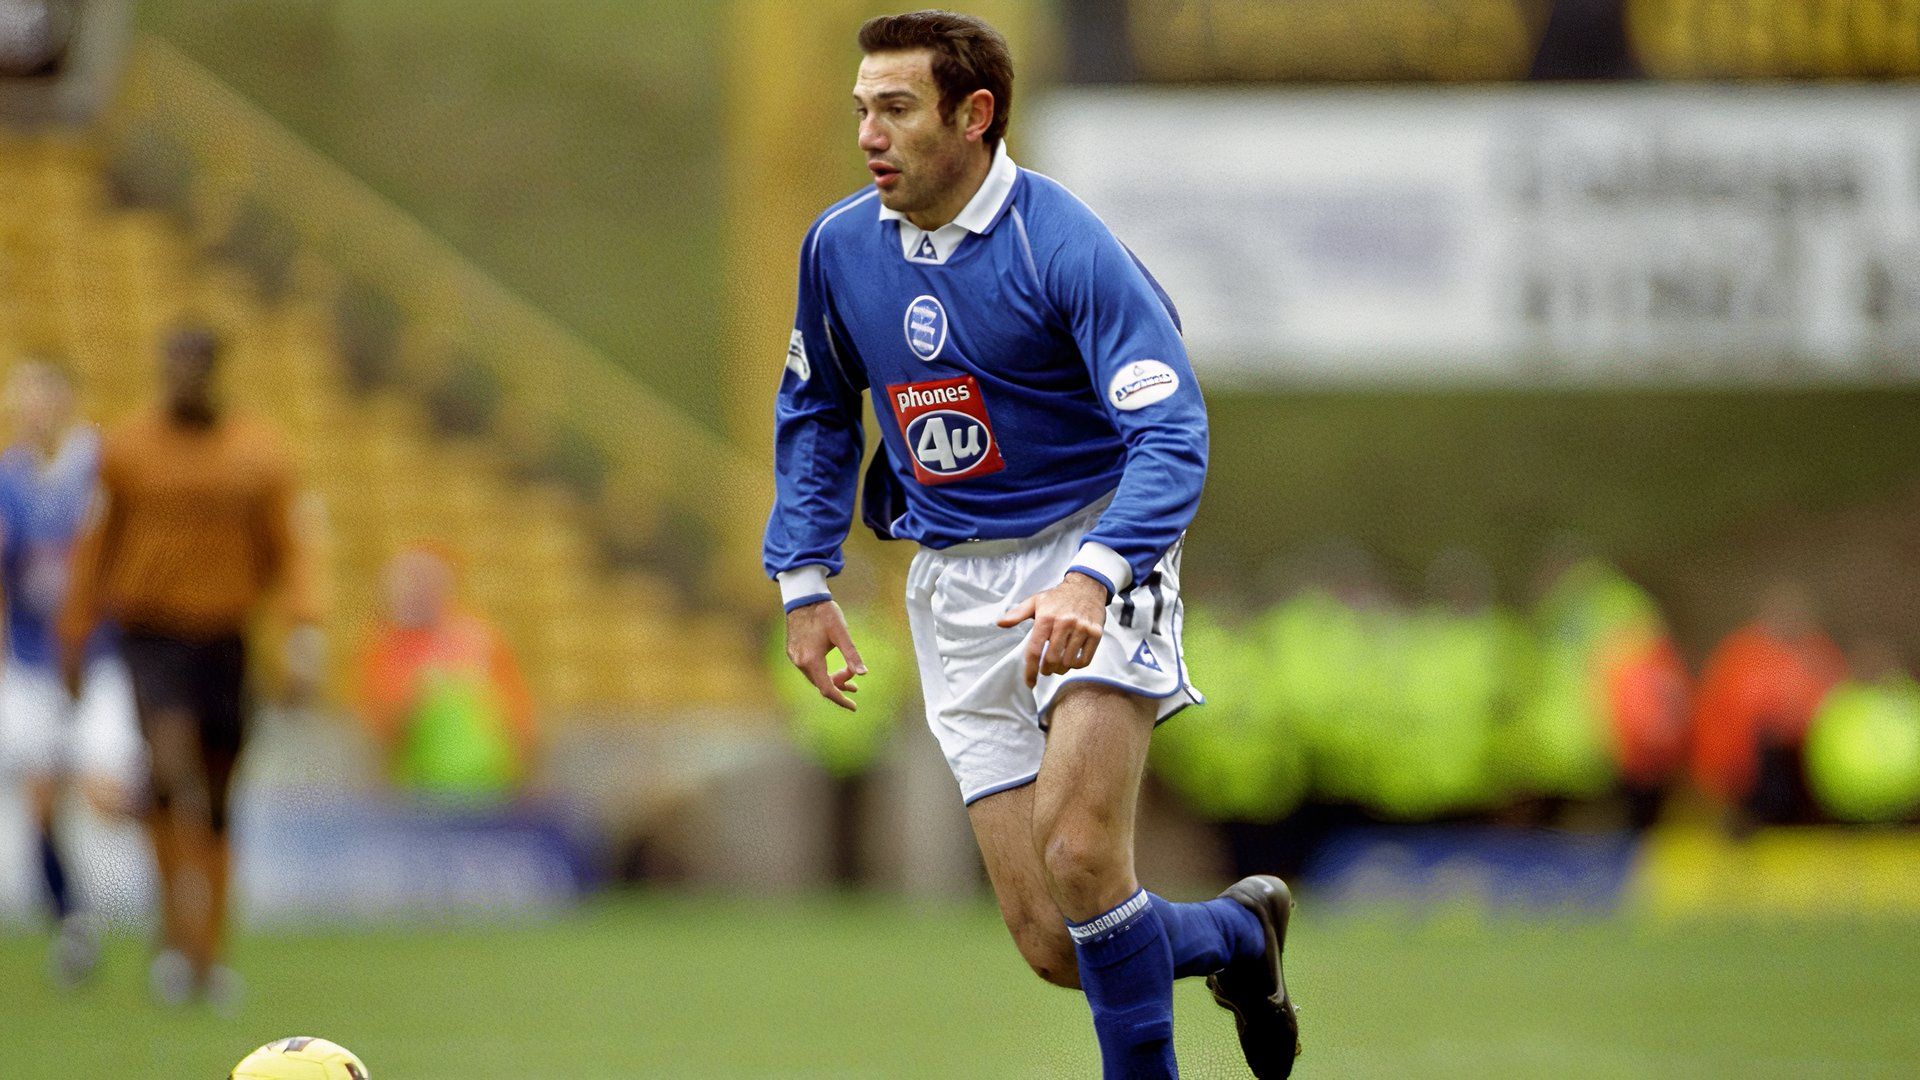 Stan Lazaridis playing for Birmingham City in 2001